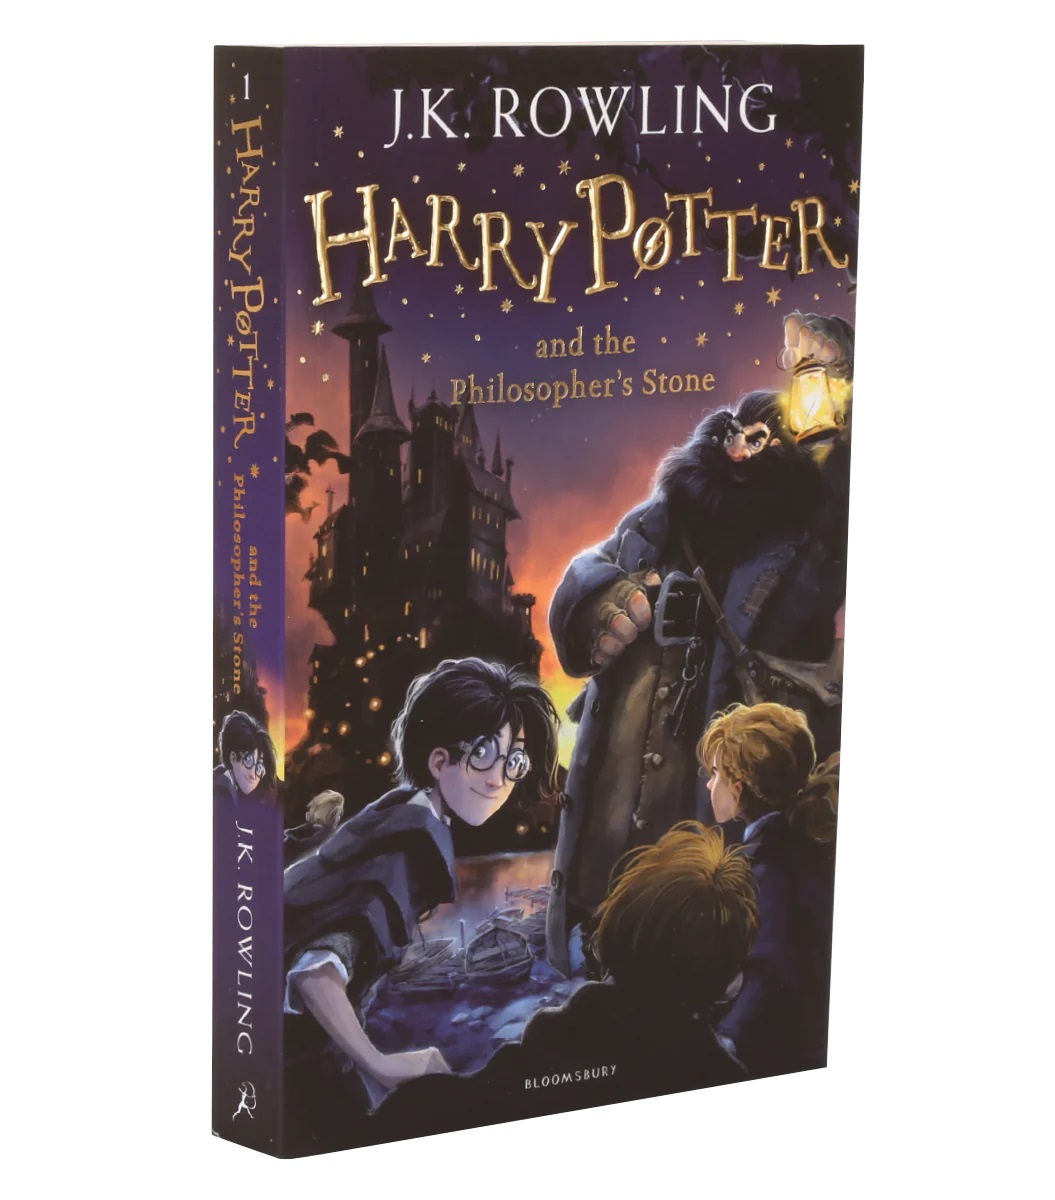 Book The Classic Harry Potter Series - book 1 : Harry Potter and the Philosopher’s Stone